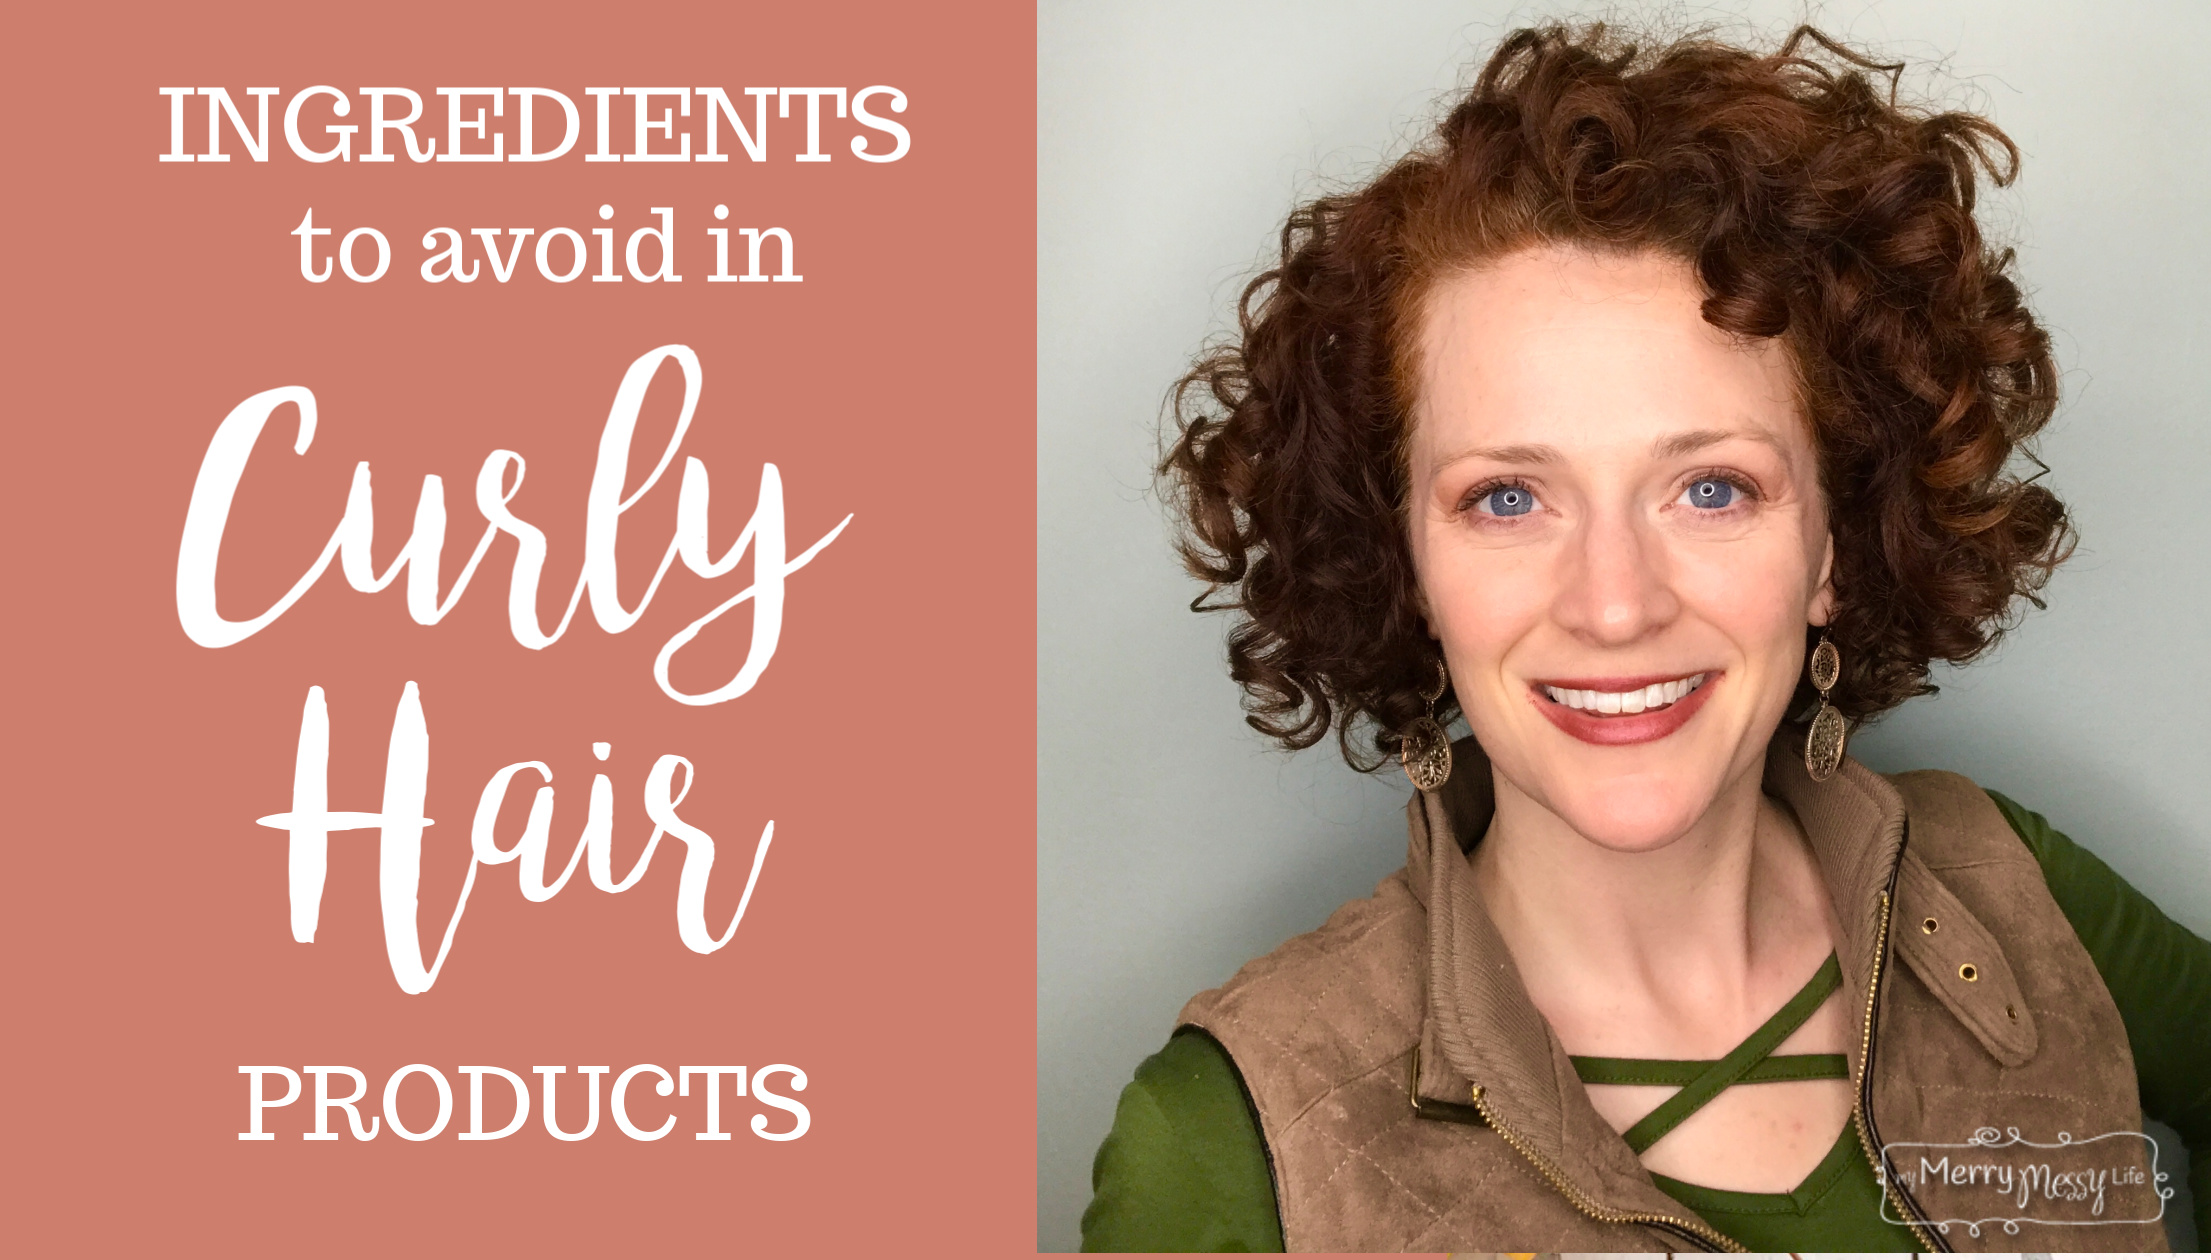 Ingredients to Avoid in Curly Hair Products - Toxins, Irritants and Drying Ingredients